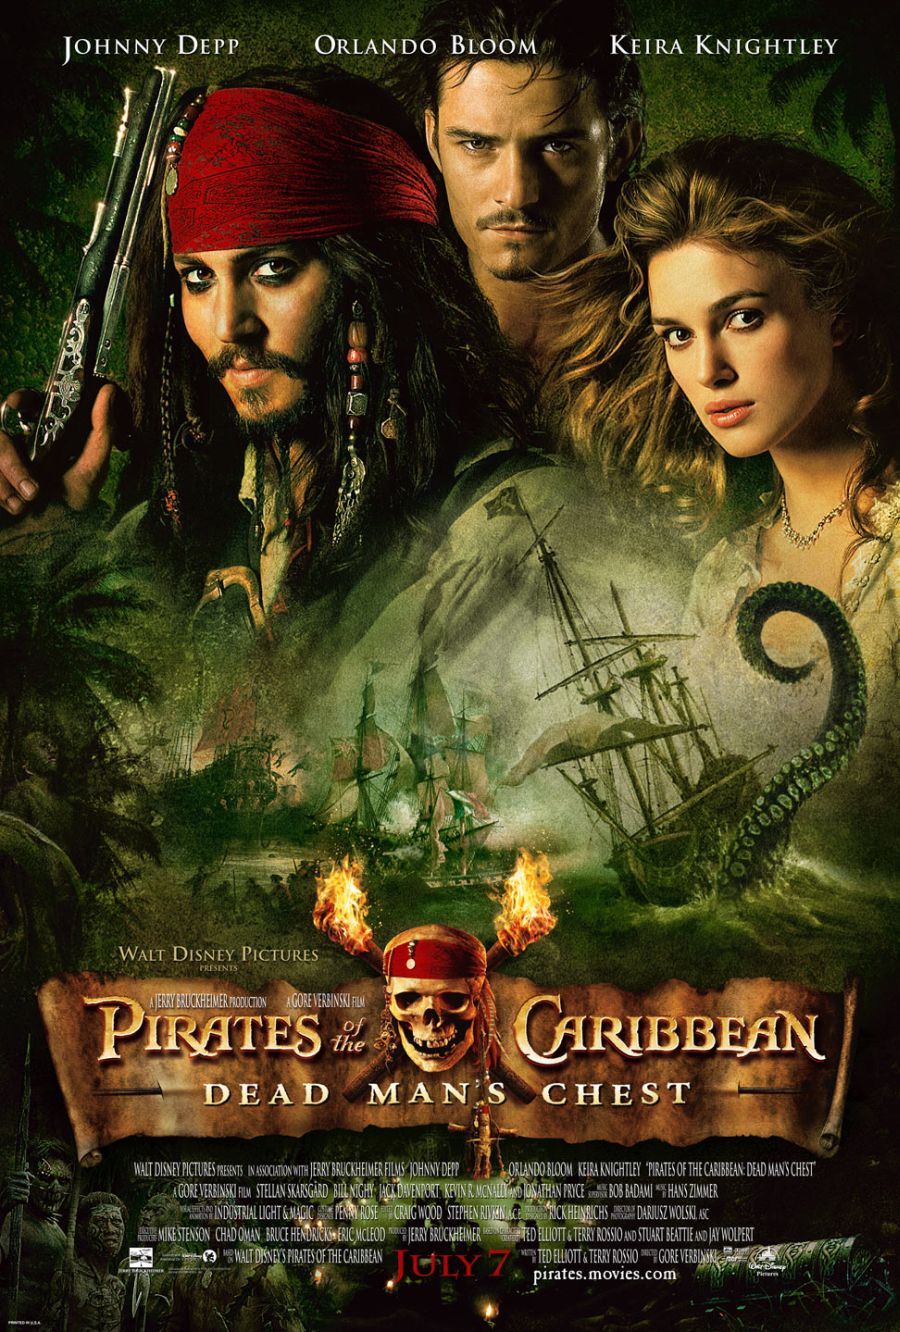 Watch Pirates Of The Caribbean 4 Online For Free No Download